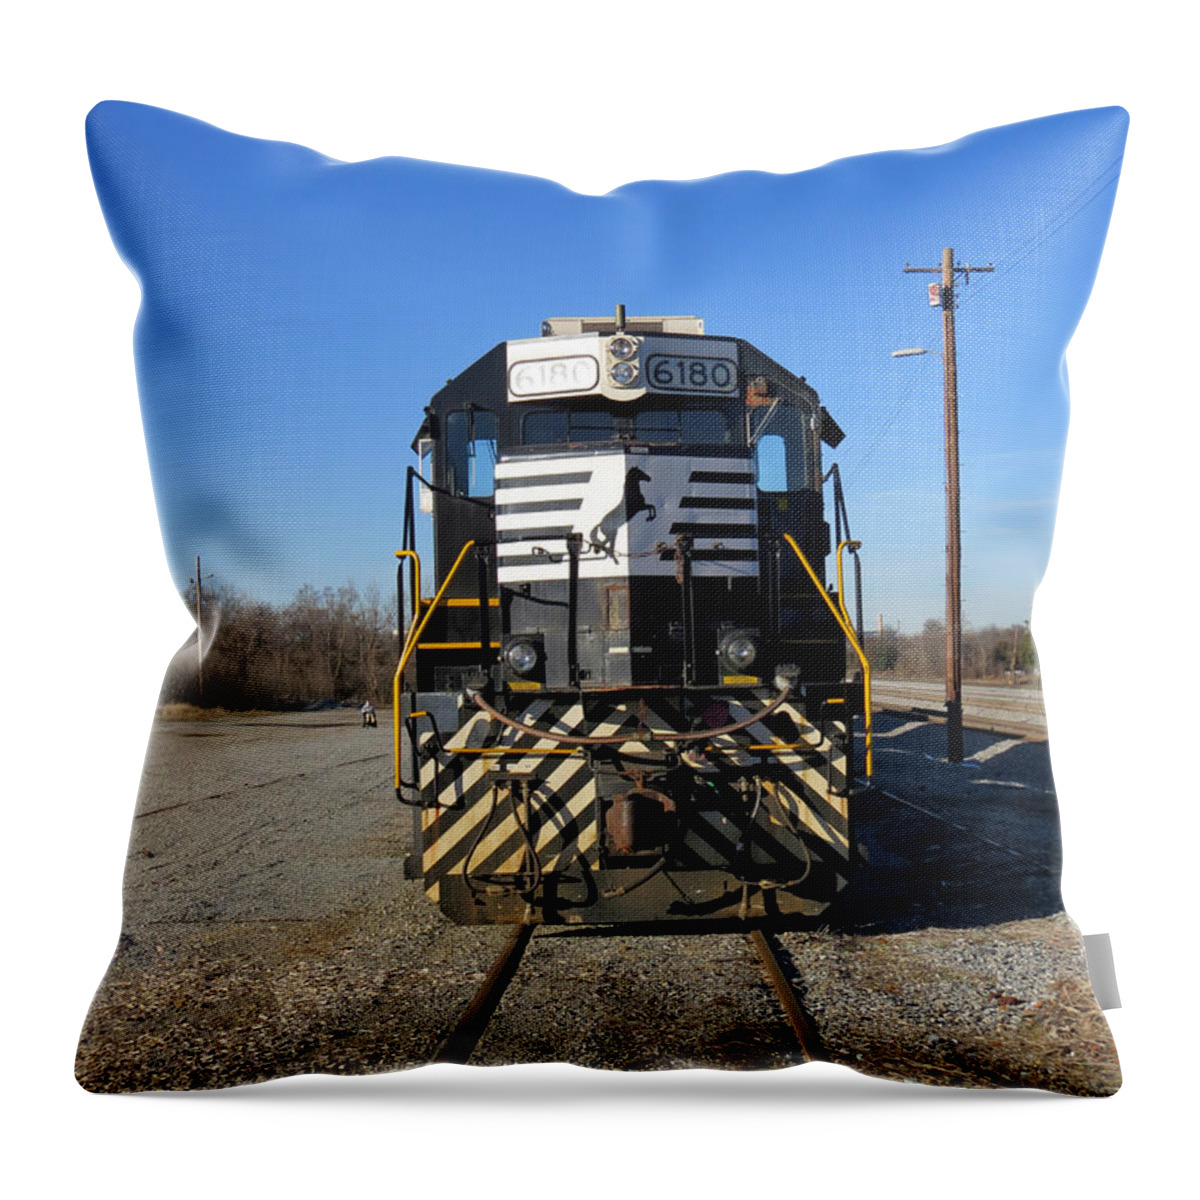 Train Throw Pillow featuring the photograph Train Ahead by Aaron Martens